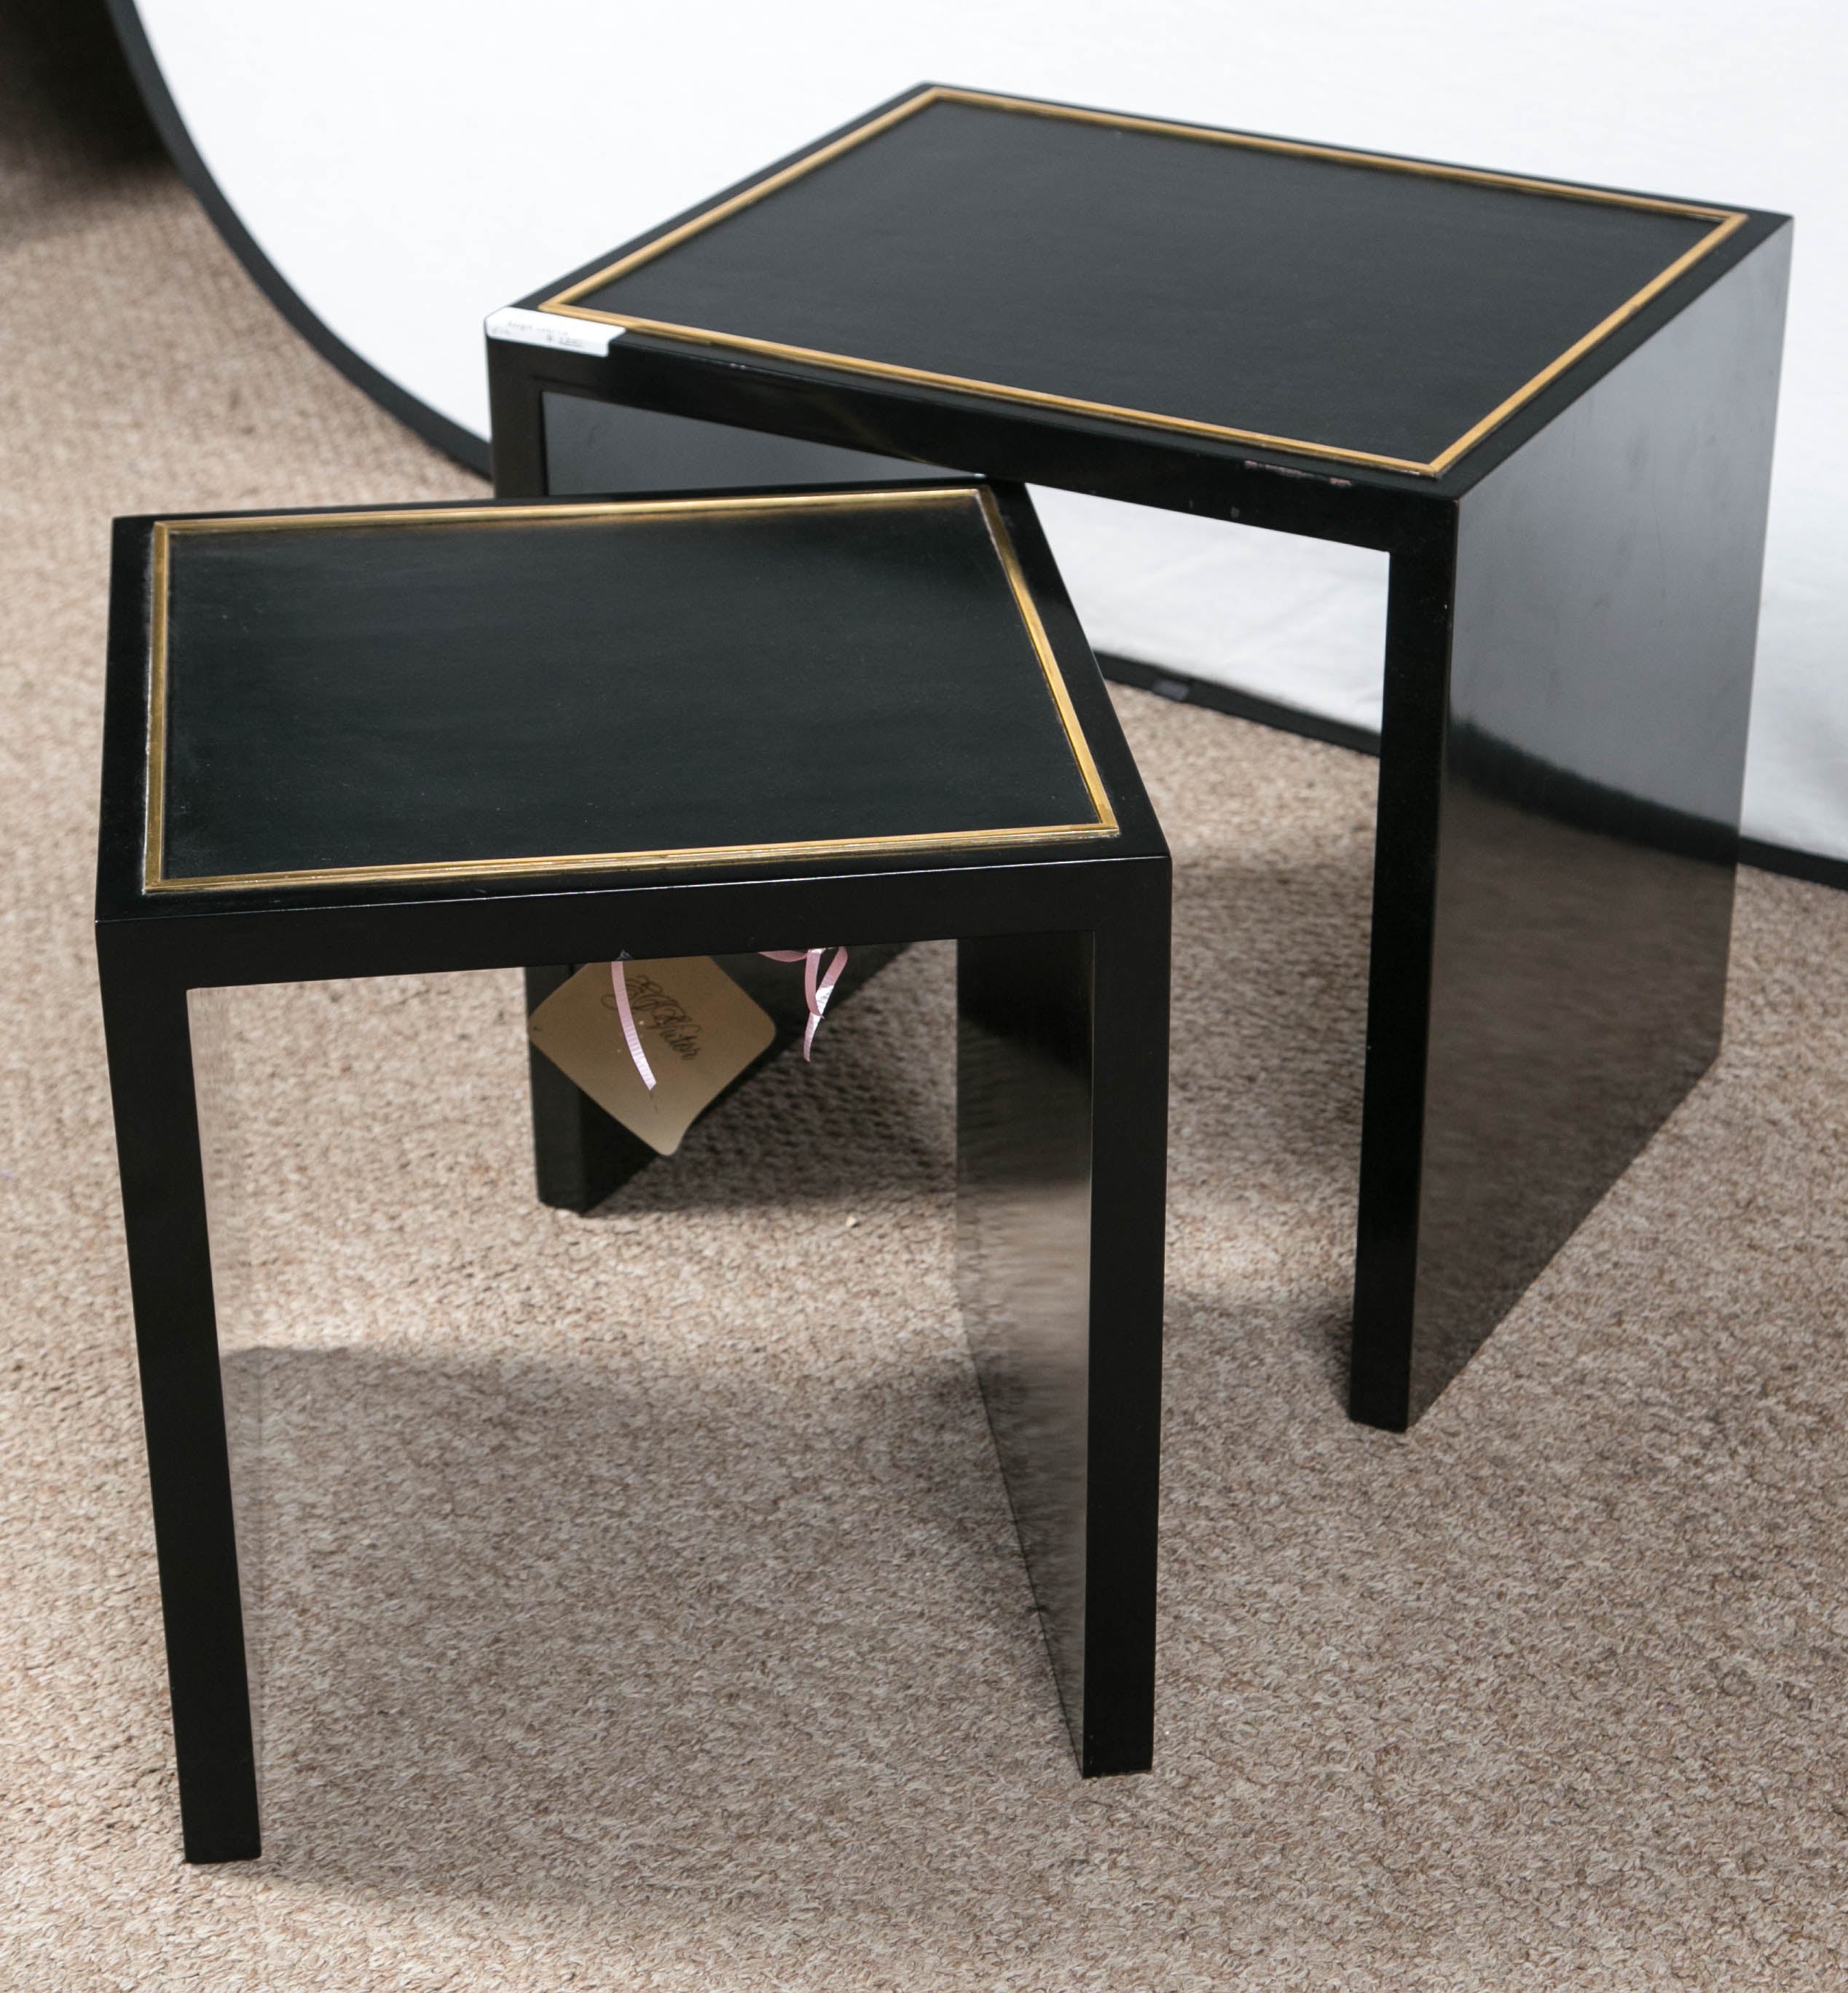 Contemporary E J Victor Set of Lacquered Ebony / Brass Inlaid Wood Leather Top Nesting Tables